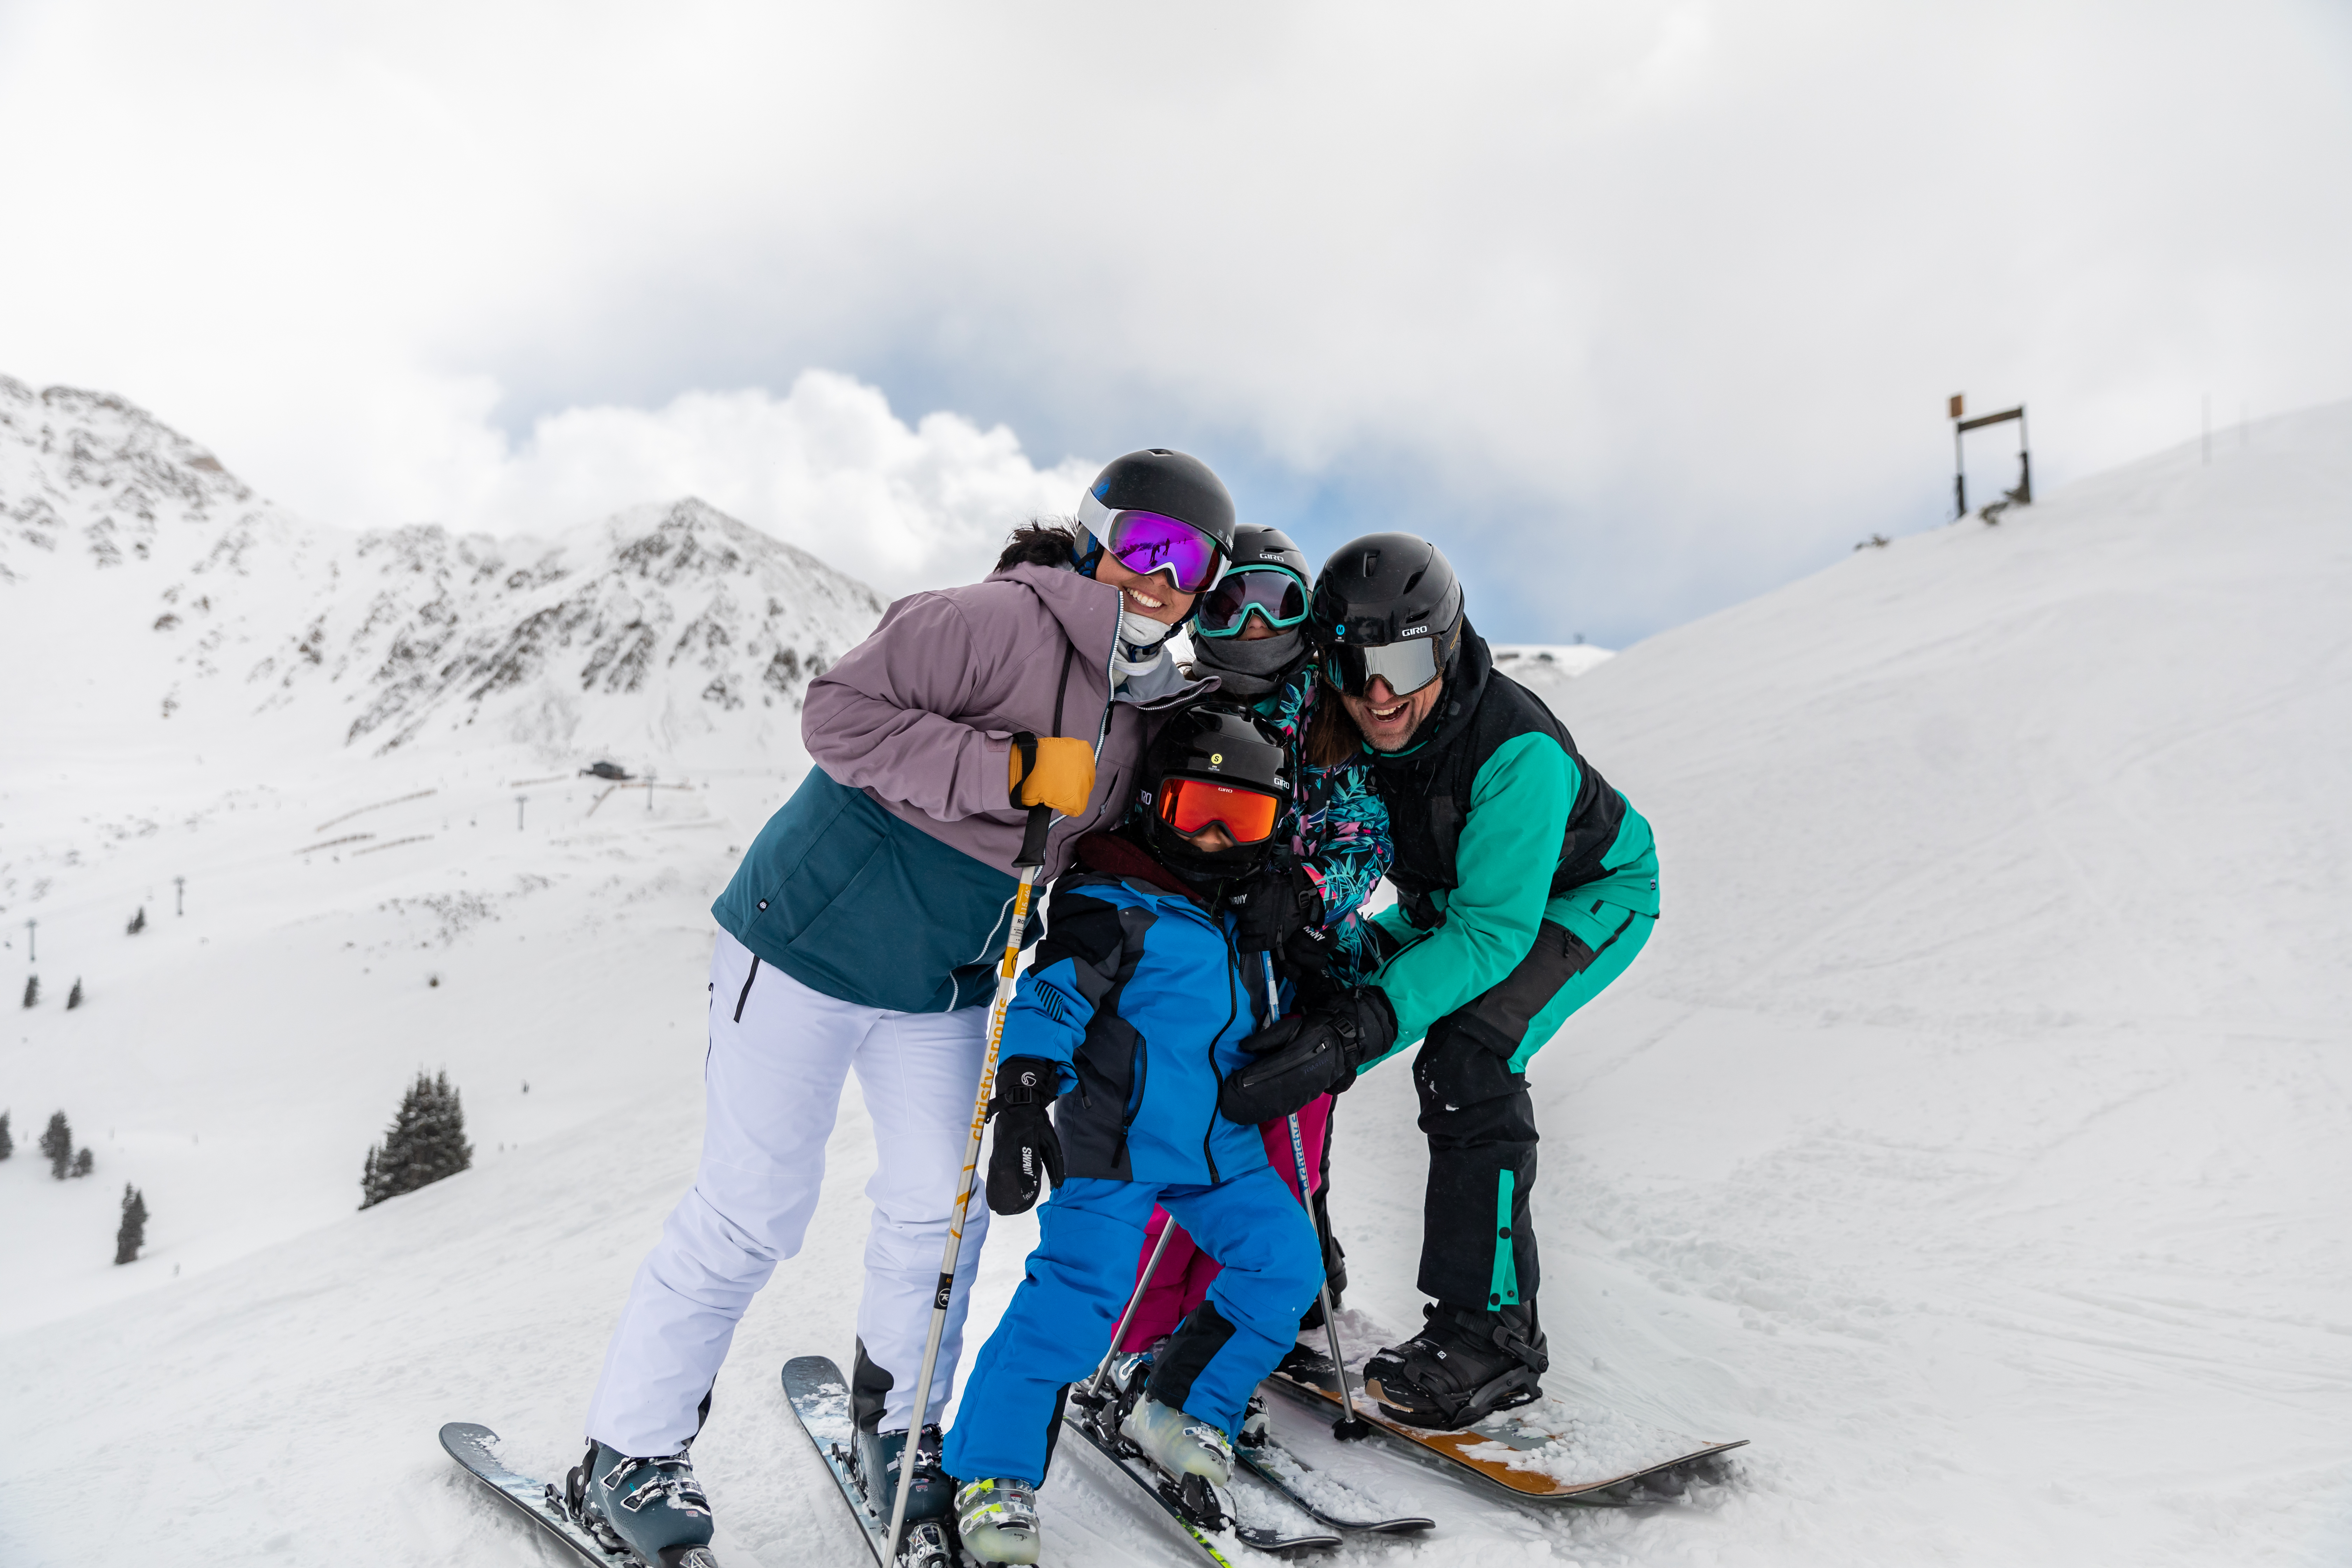 Image shows a family of four on the ski slopes, enjoying a spontaneous day on the mountain with same-day rentals from Christy Sports.